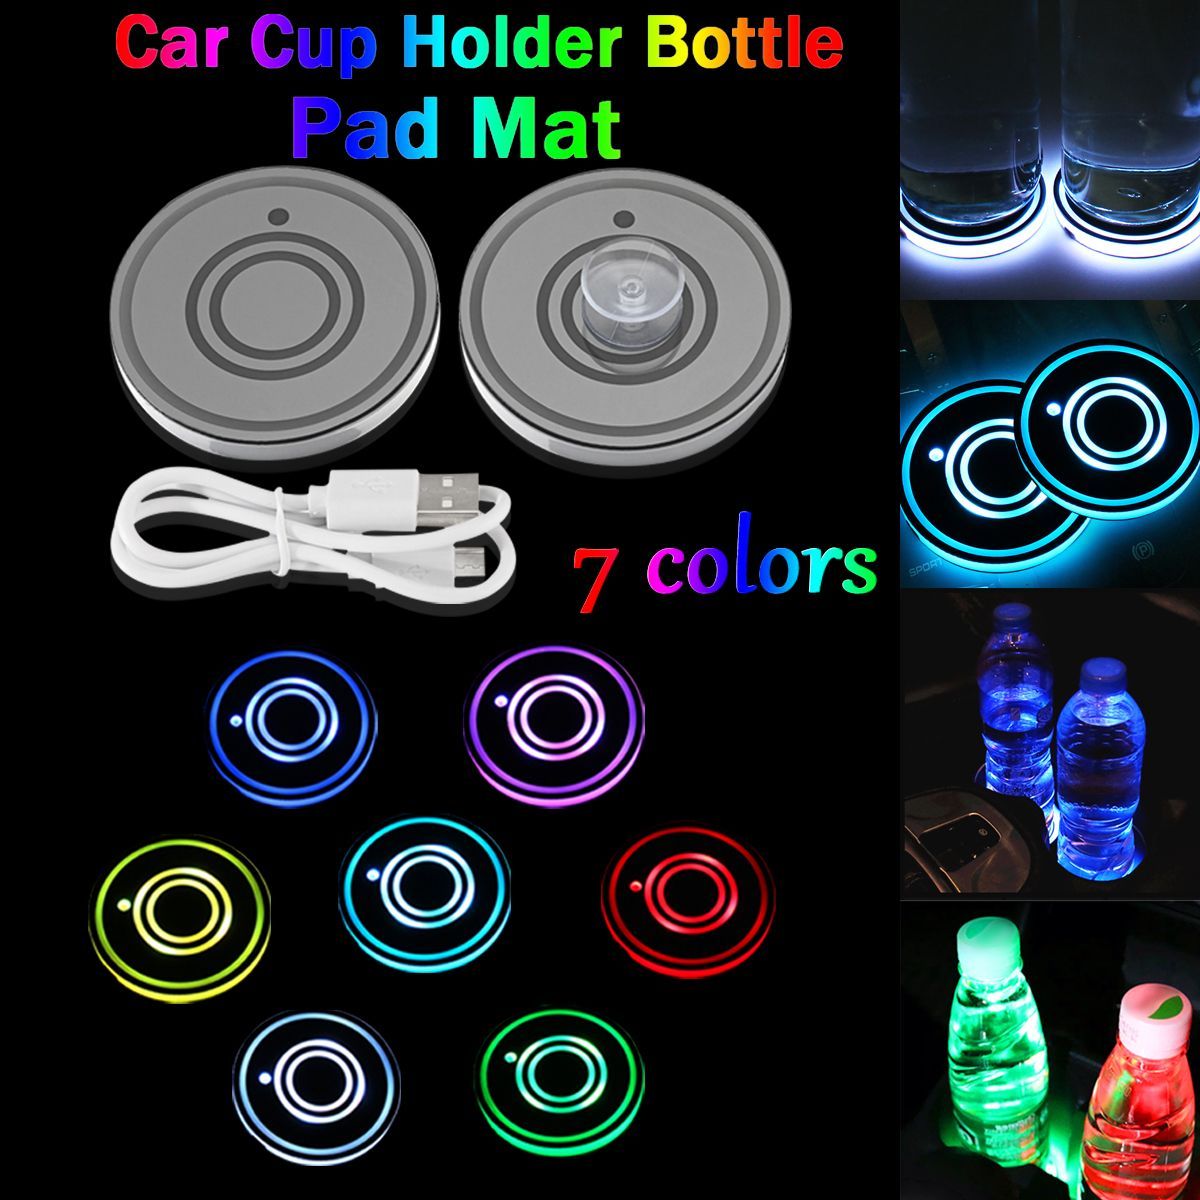 Universal-7-Colors-LED-Car-Cup-Holder-Pad-Bottle-Mat-Auto-Interior-Atmosphere-Lights-USB-Charging-1617830